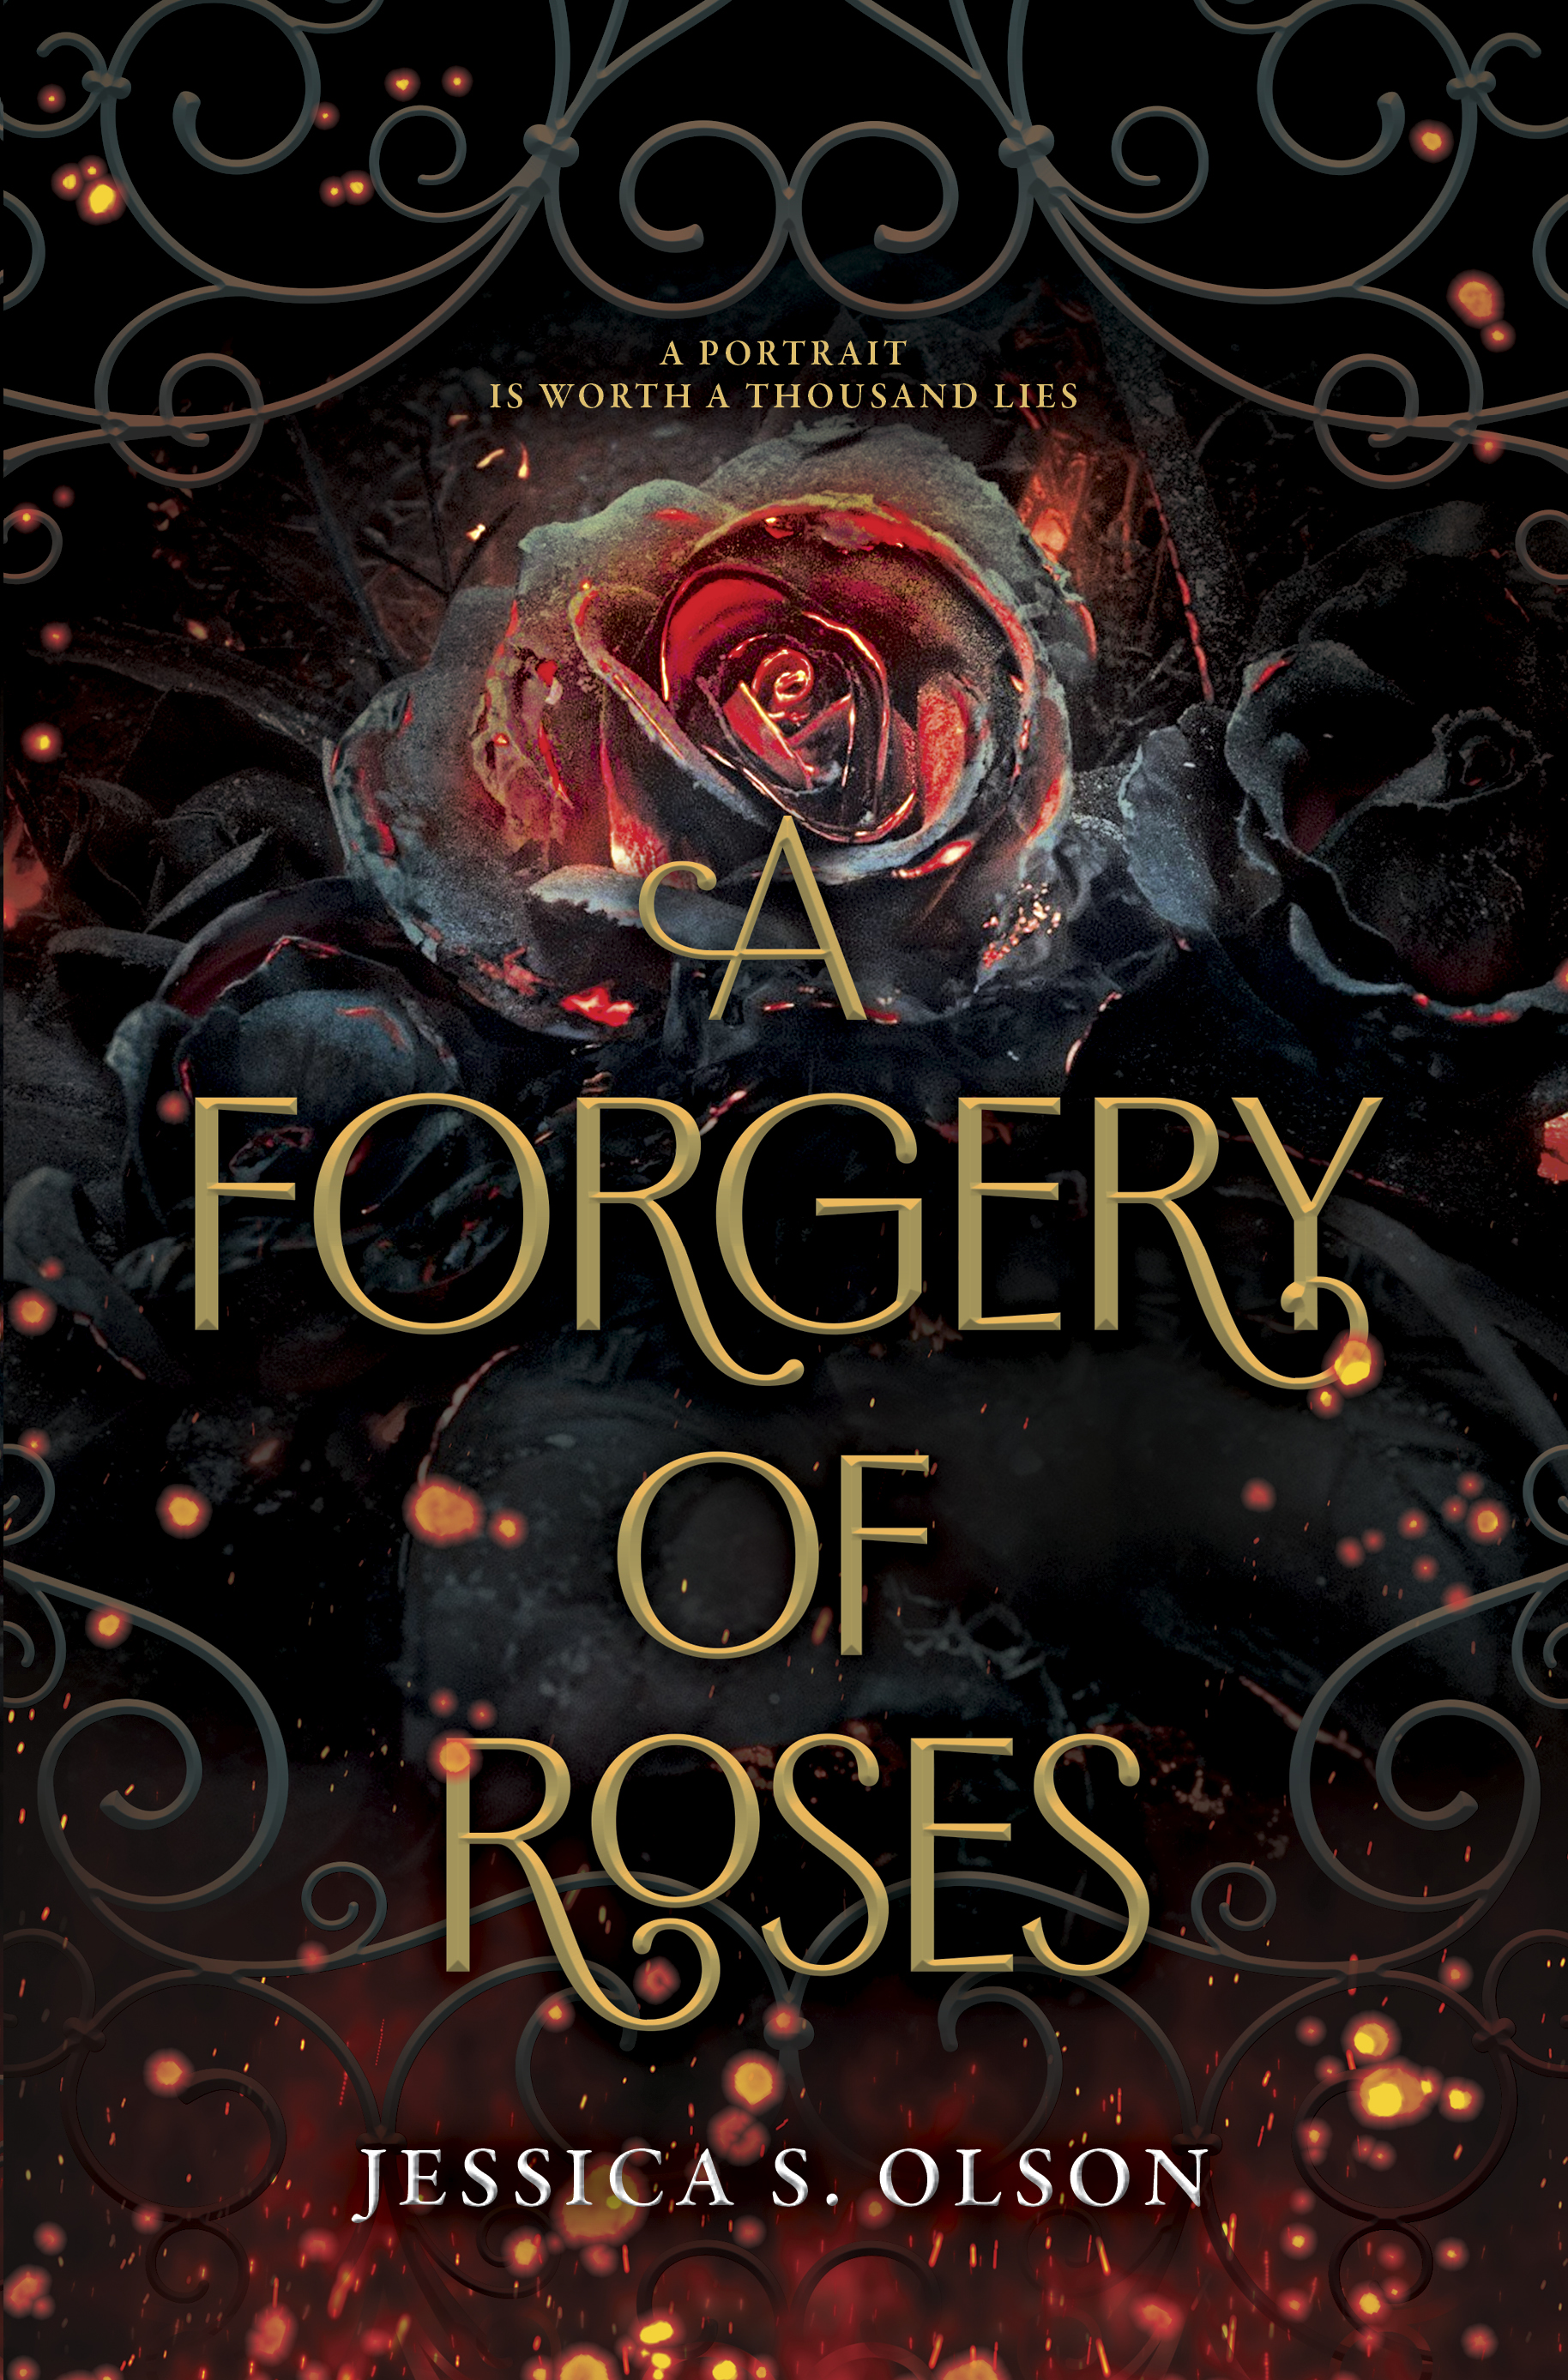 A Forgery of Roses book jacket